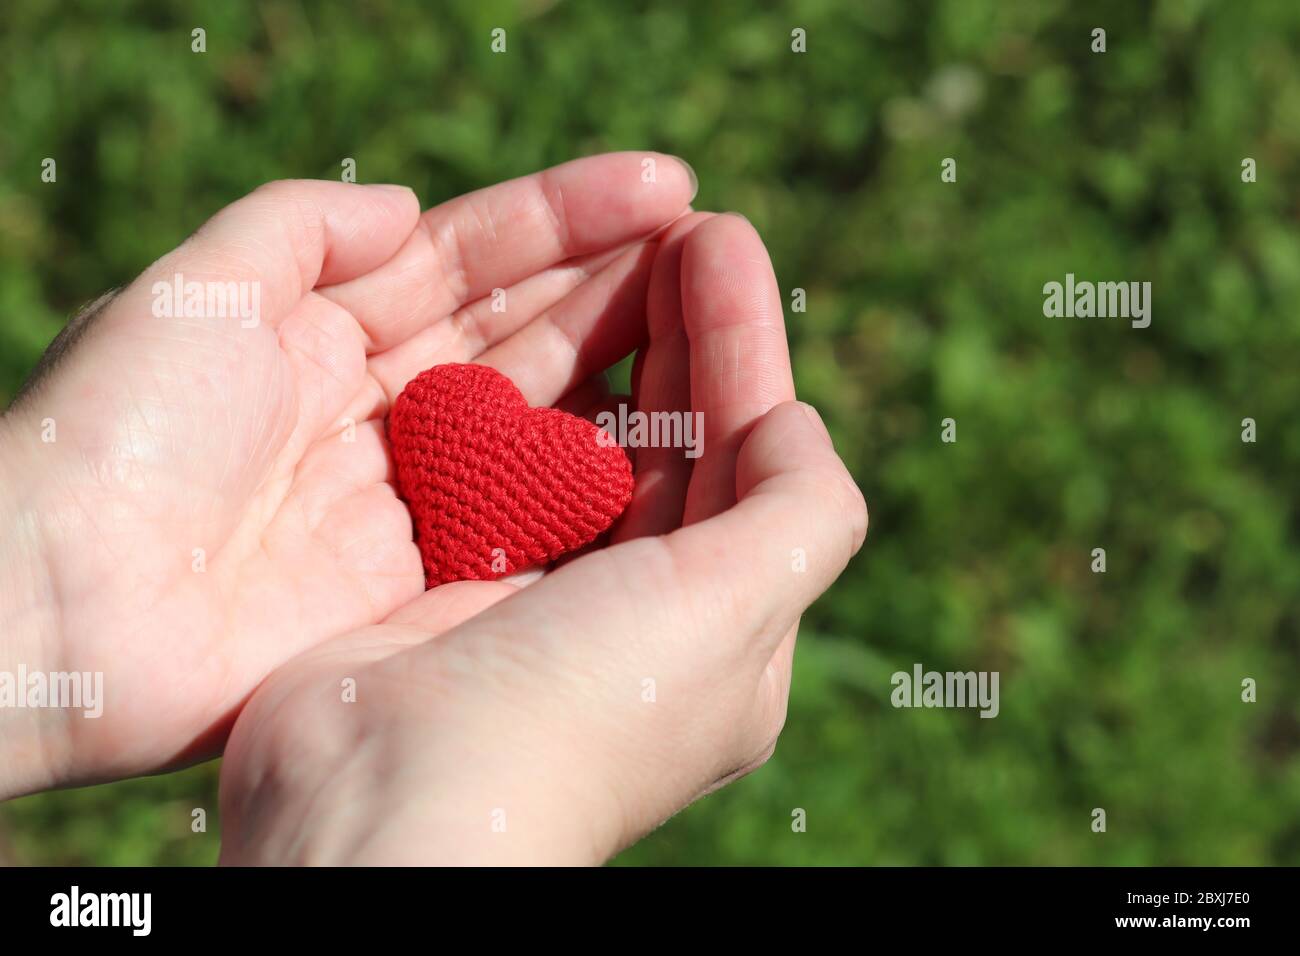 Red knitted heart in female palm hands on blurred nature background. Concept of love, health care, motherhood, blood donation Stock Photo